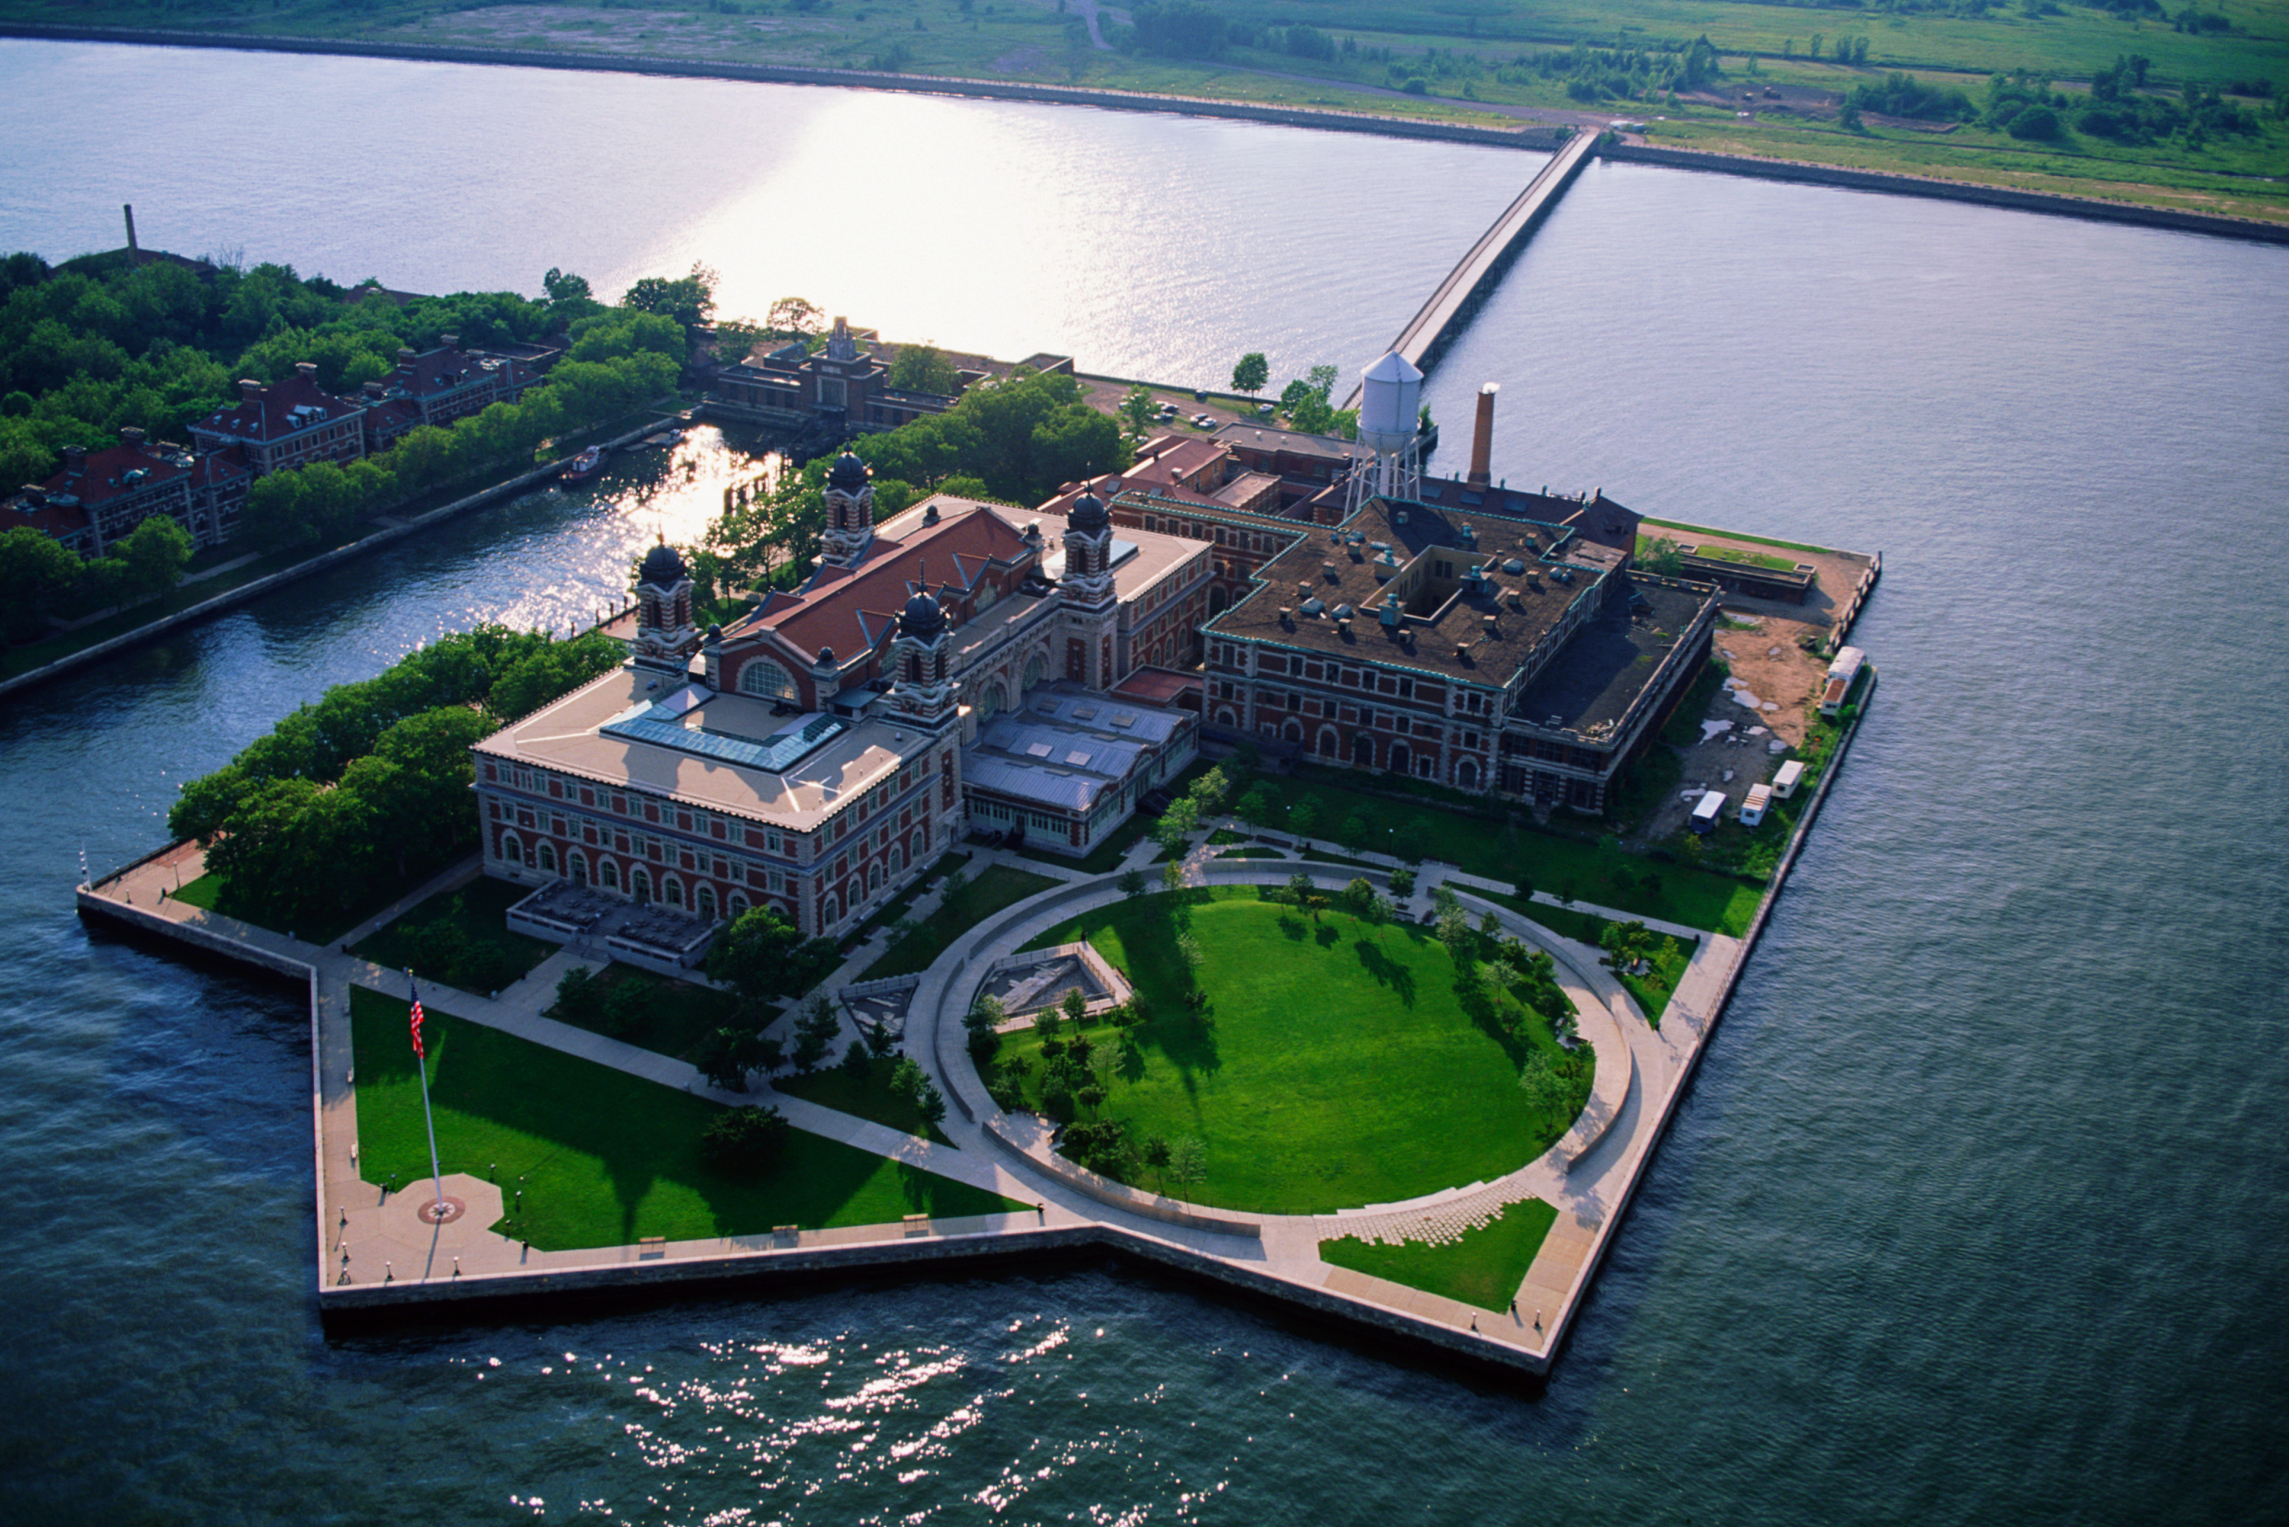 Aerial view of the Ferry Building and Hospitals at Ellis Island in New York